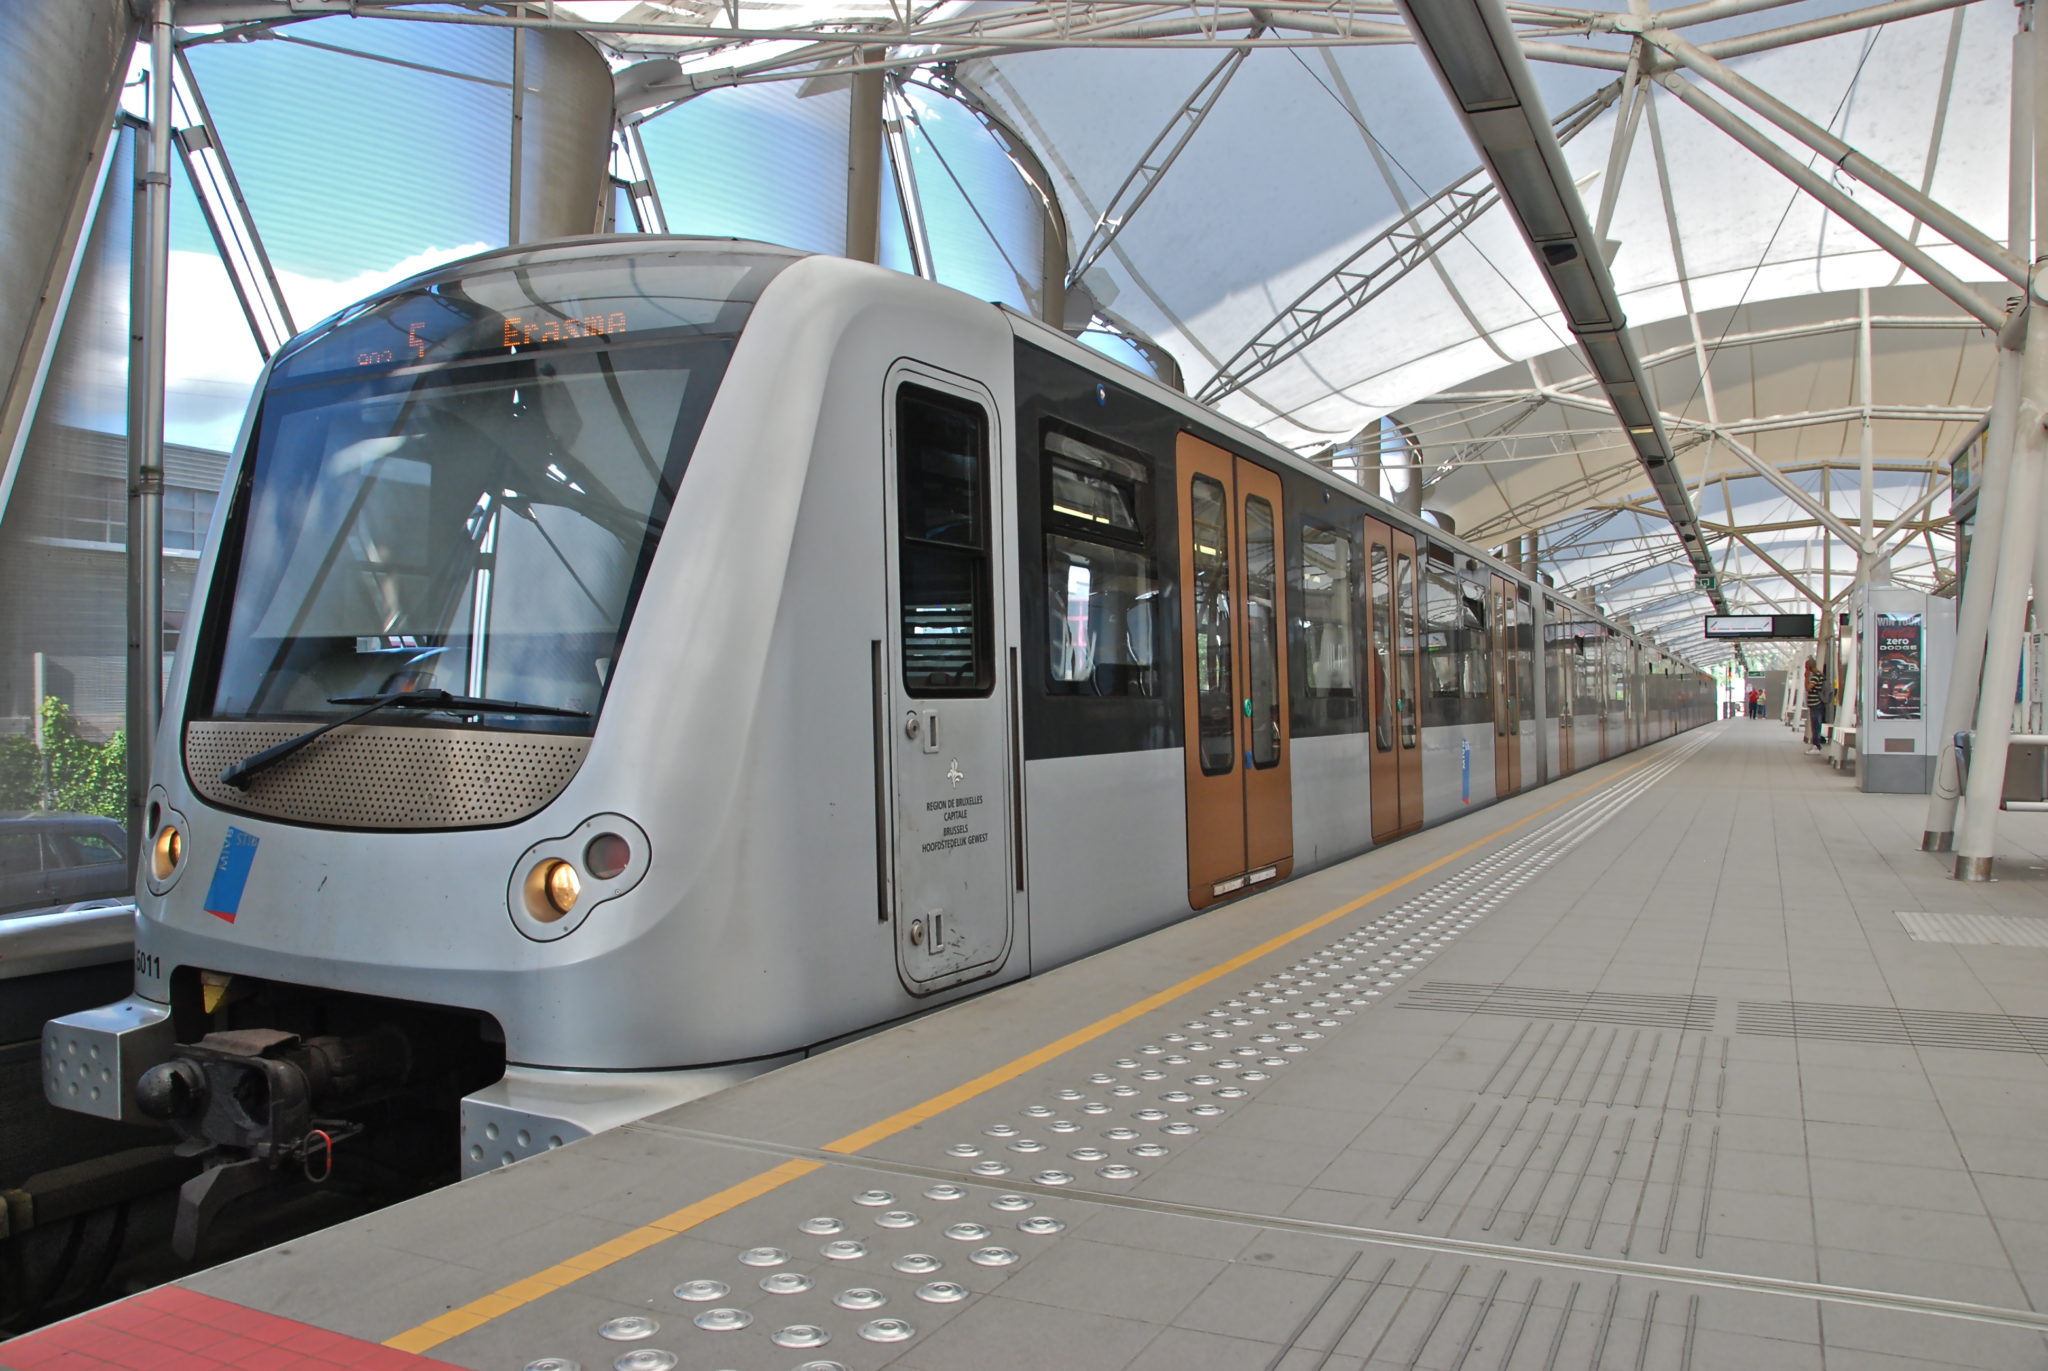 CAF is a major rolling stock manufacturer in Europe. Here: Brussels Metro